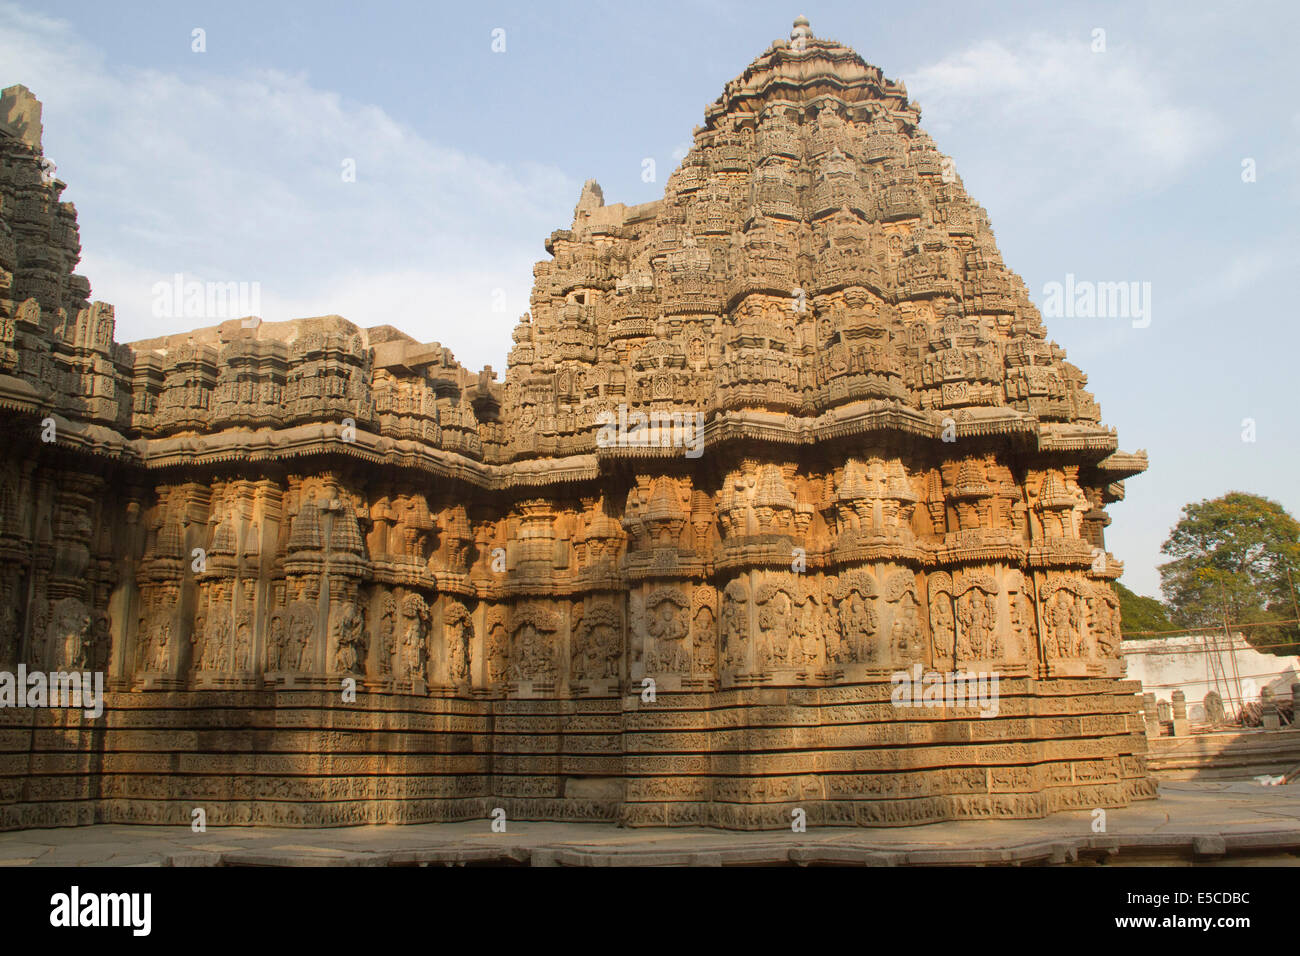 Keshava Temple covered with stone carving built in 1268 is one of the best examples of Hoyala architecture.Somnathpur,India Stock Photo